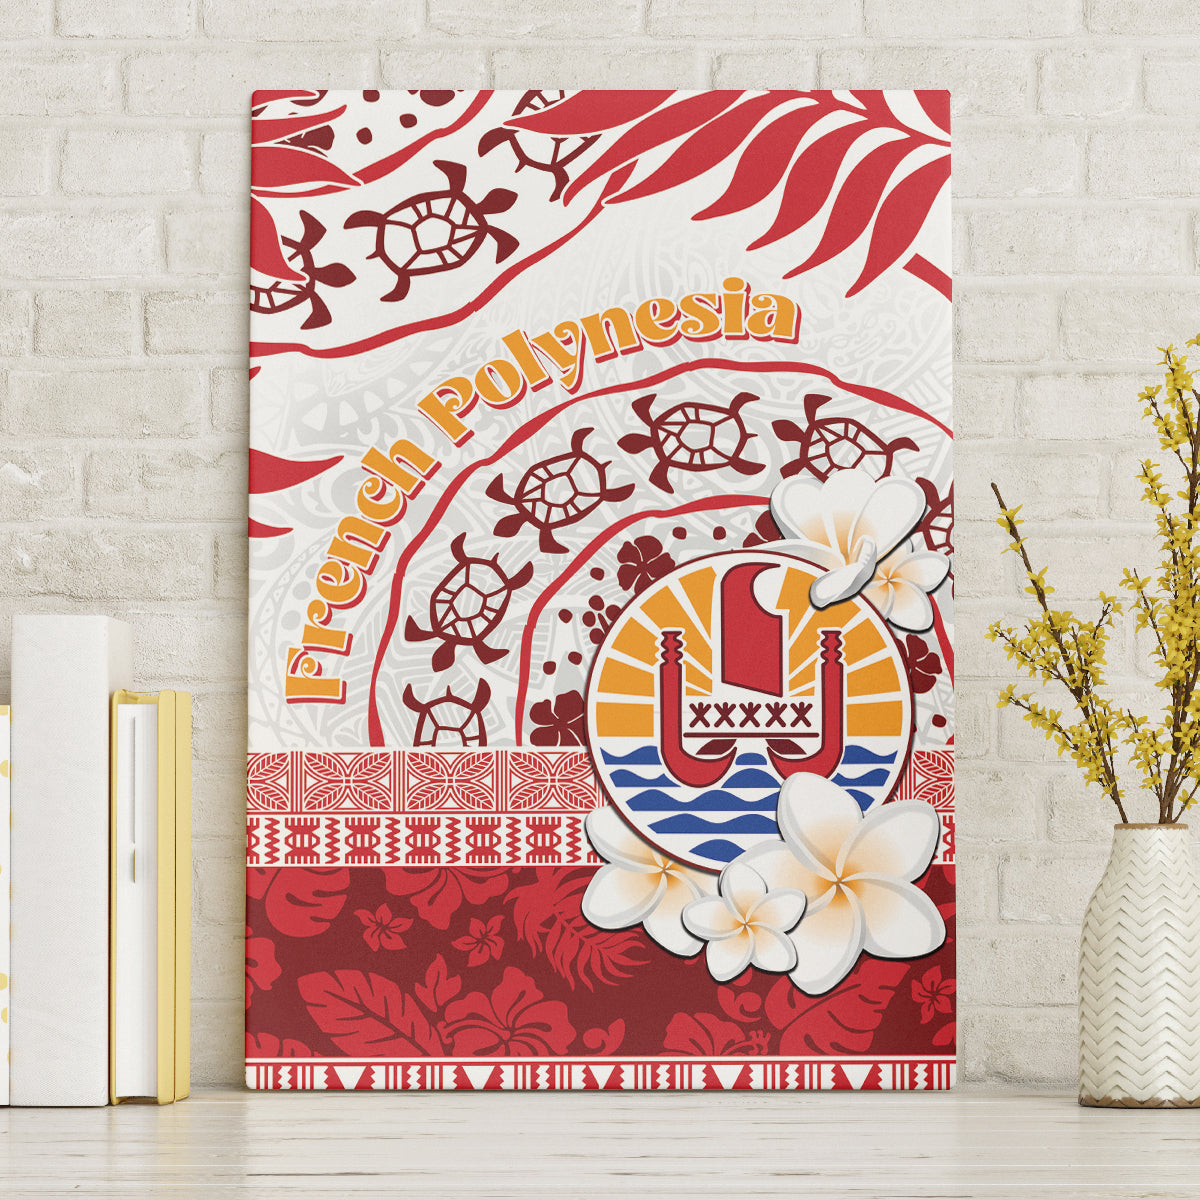 French Polynesia Internal Autonomy Day Canvas Wall Art Tropical Hibiscus And Turtle Pattern